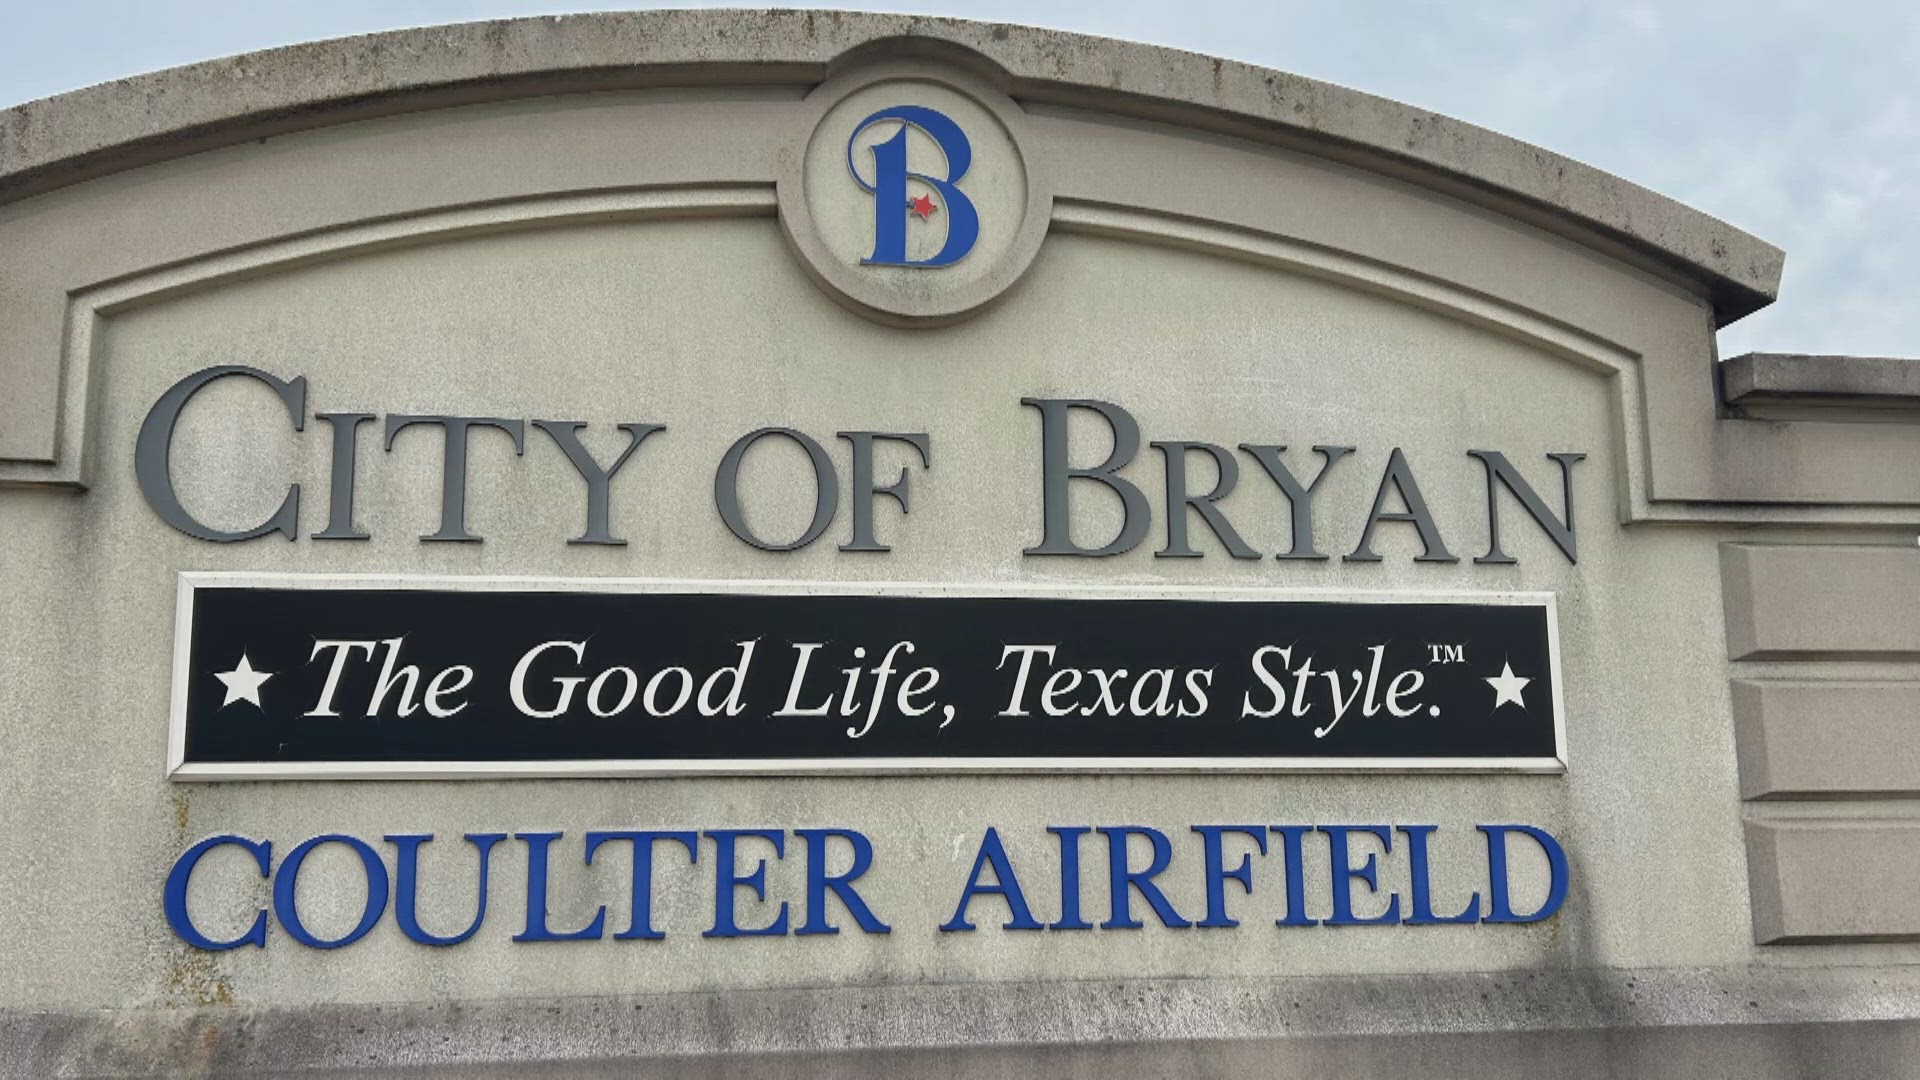 Last year, the Bryan City Council approved a $5.5 million hangar construction project to expand Coulter Airfield.